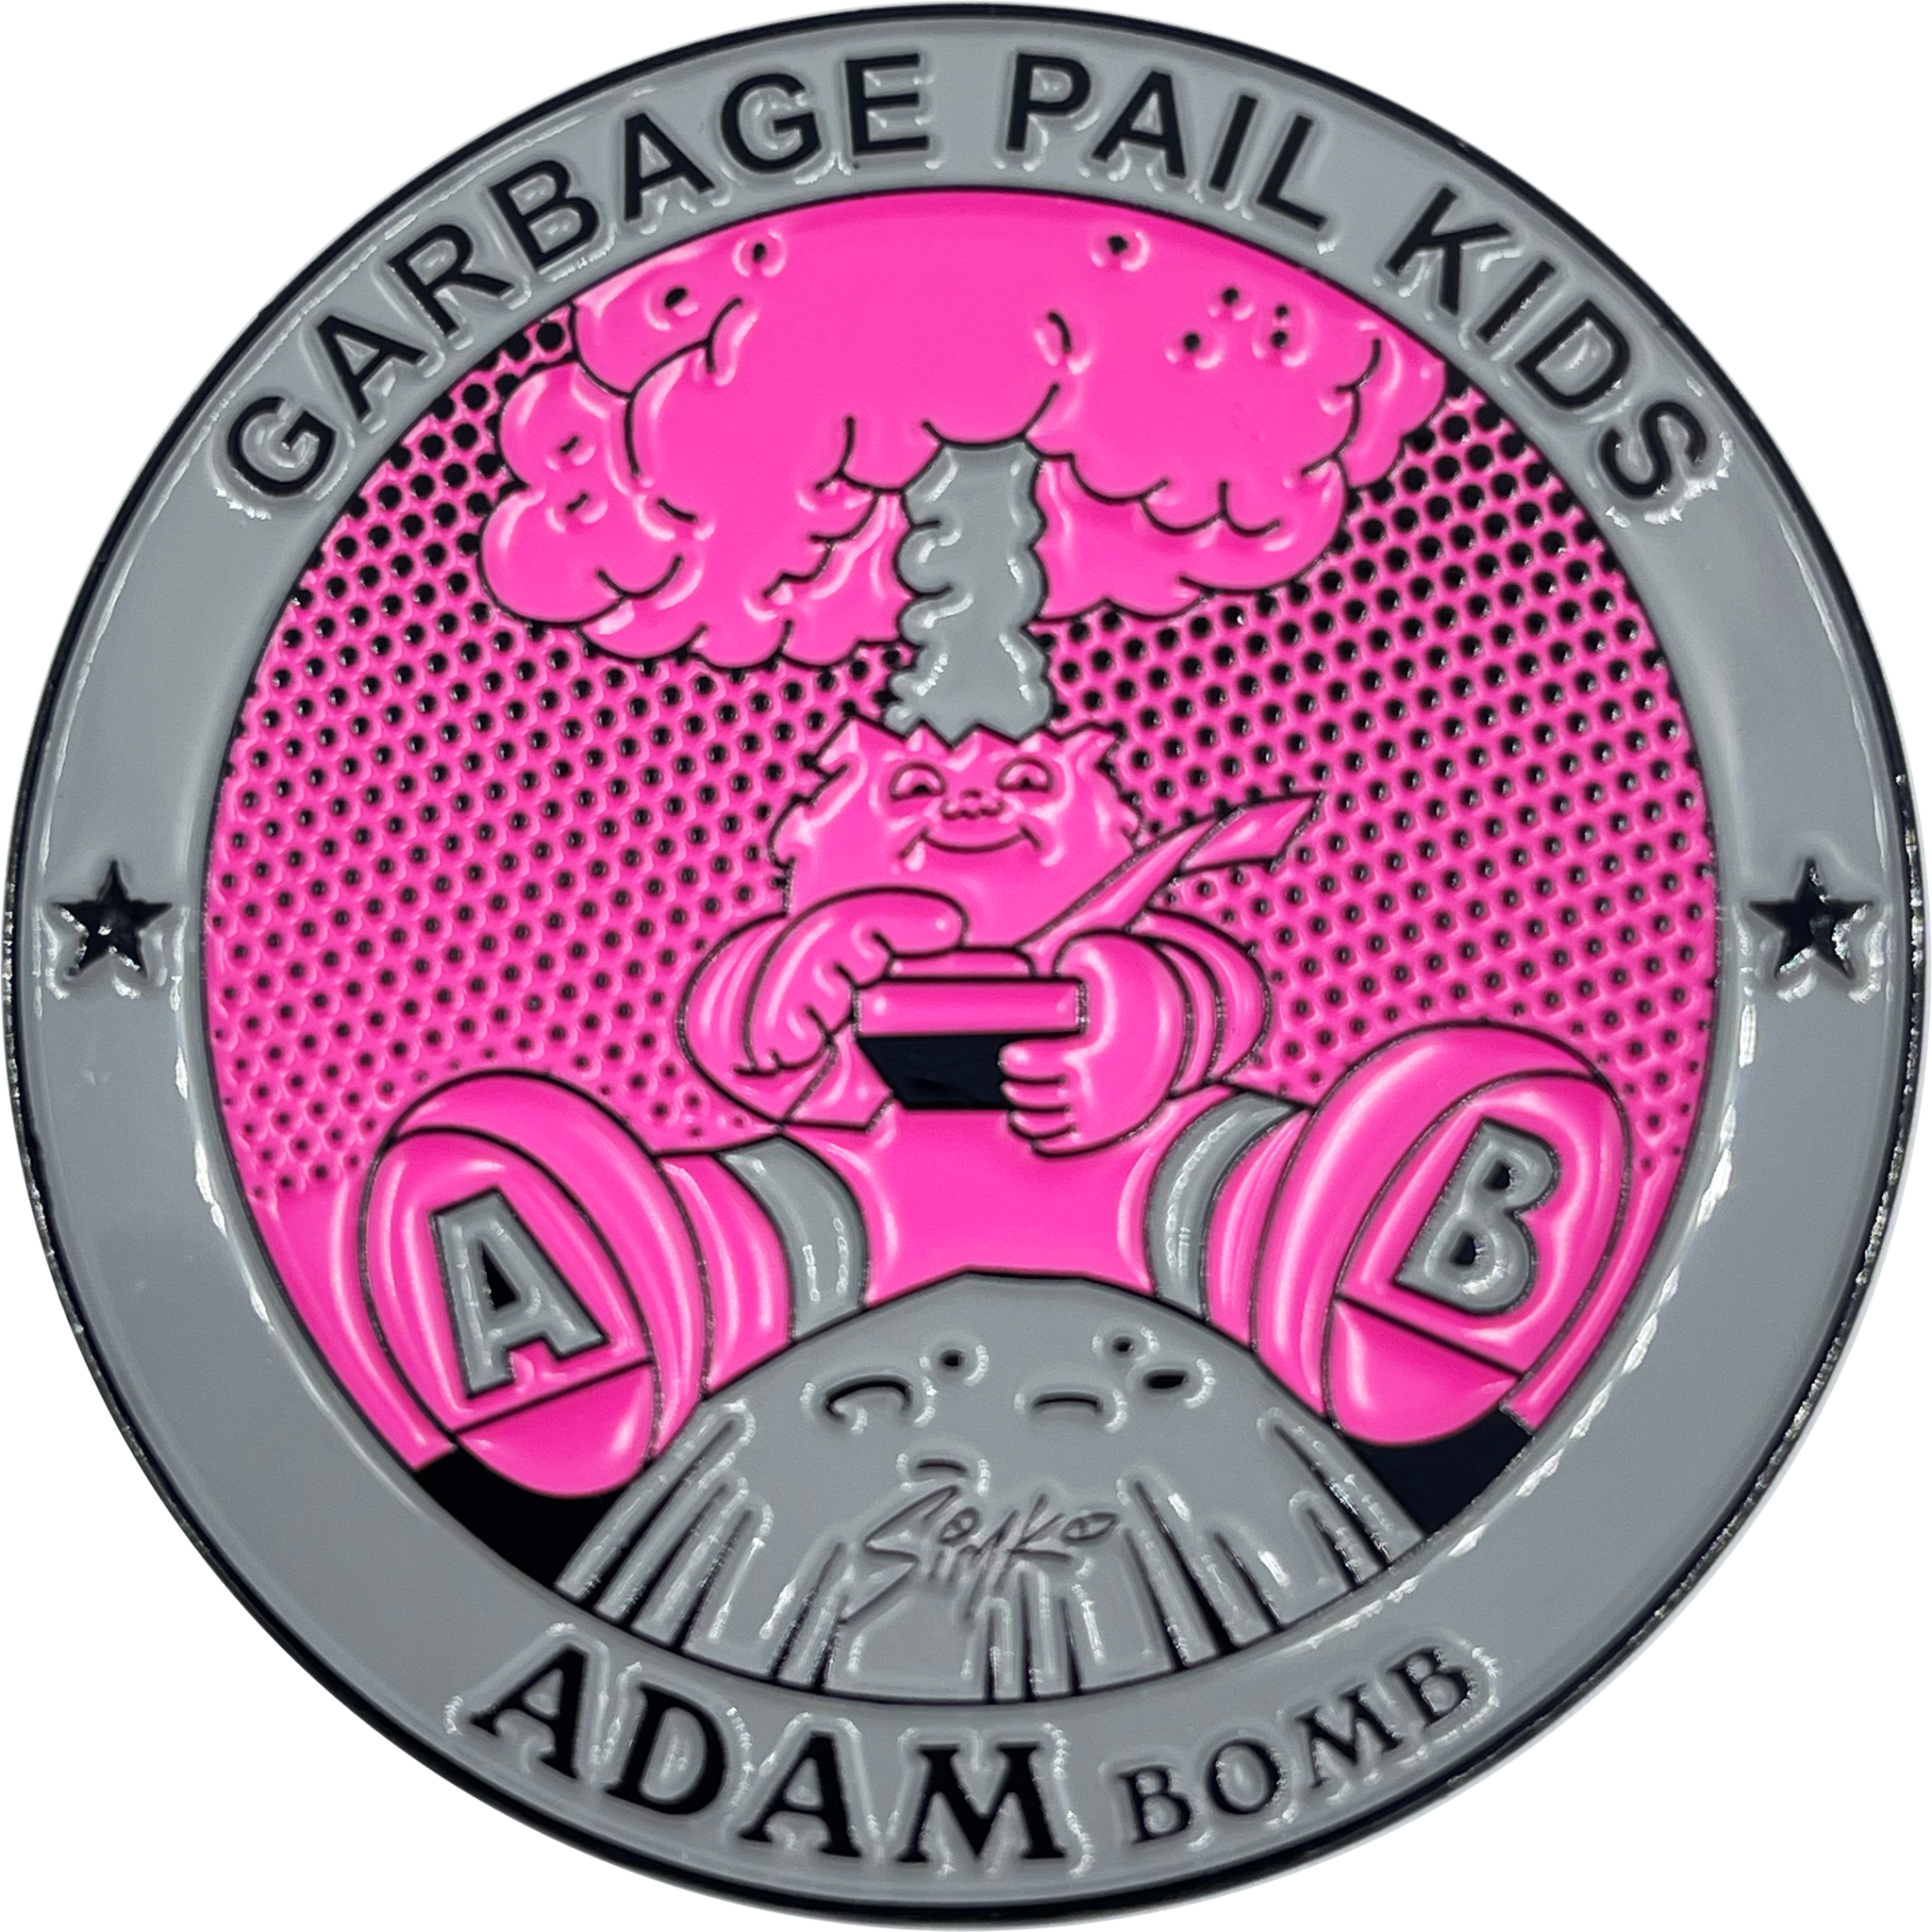 Lunar Adam Bomb SIMKO PINK & GRAY VARIATION only 50 made